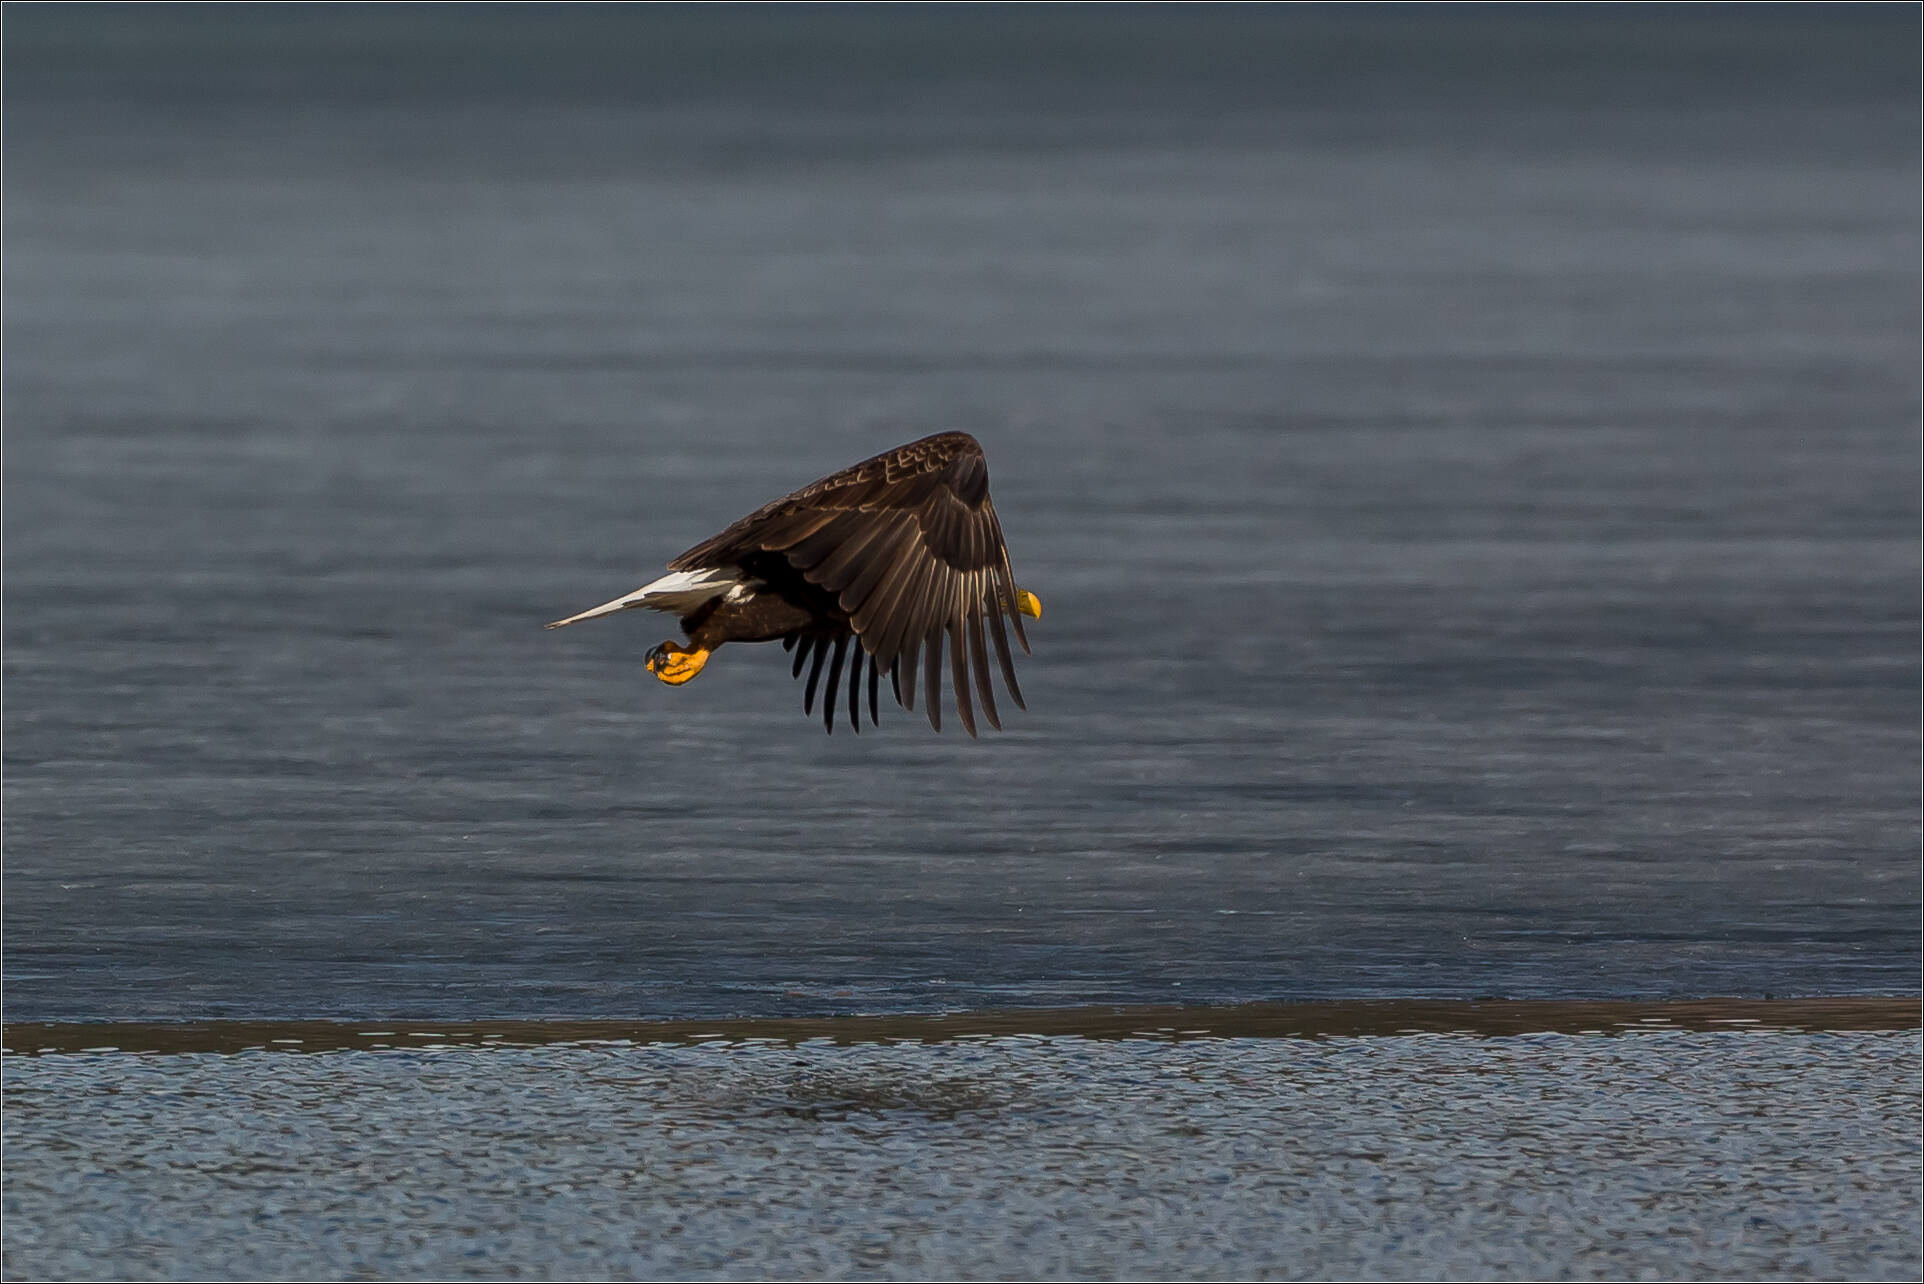 what do bald eagles eat and how is the bald eagle an opportunistic scavenger that steals food